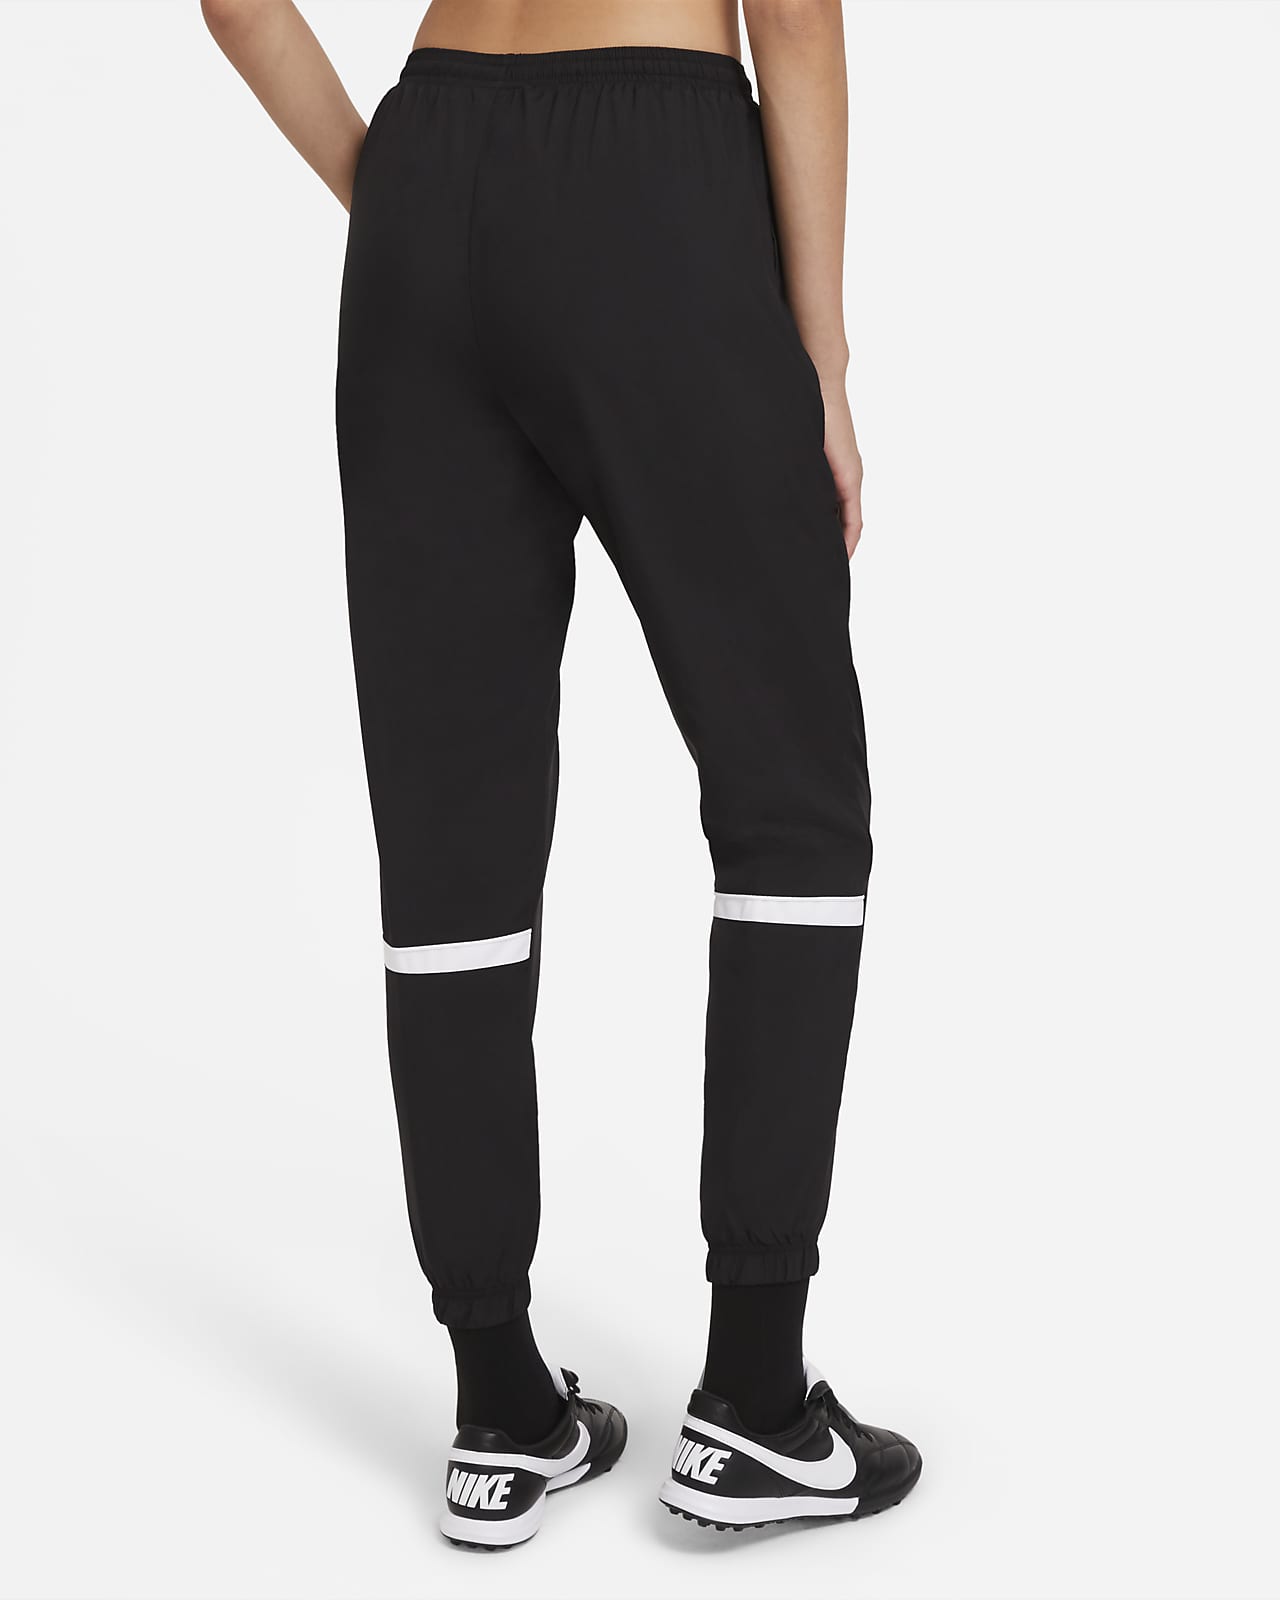 Nike Track Pants Womens Briefs Black Polyester 1421a9 - Buy Nike Track  Pants Womens Briefs Black Polyester 1421a9 online in India